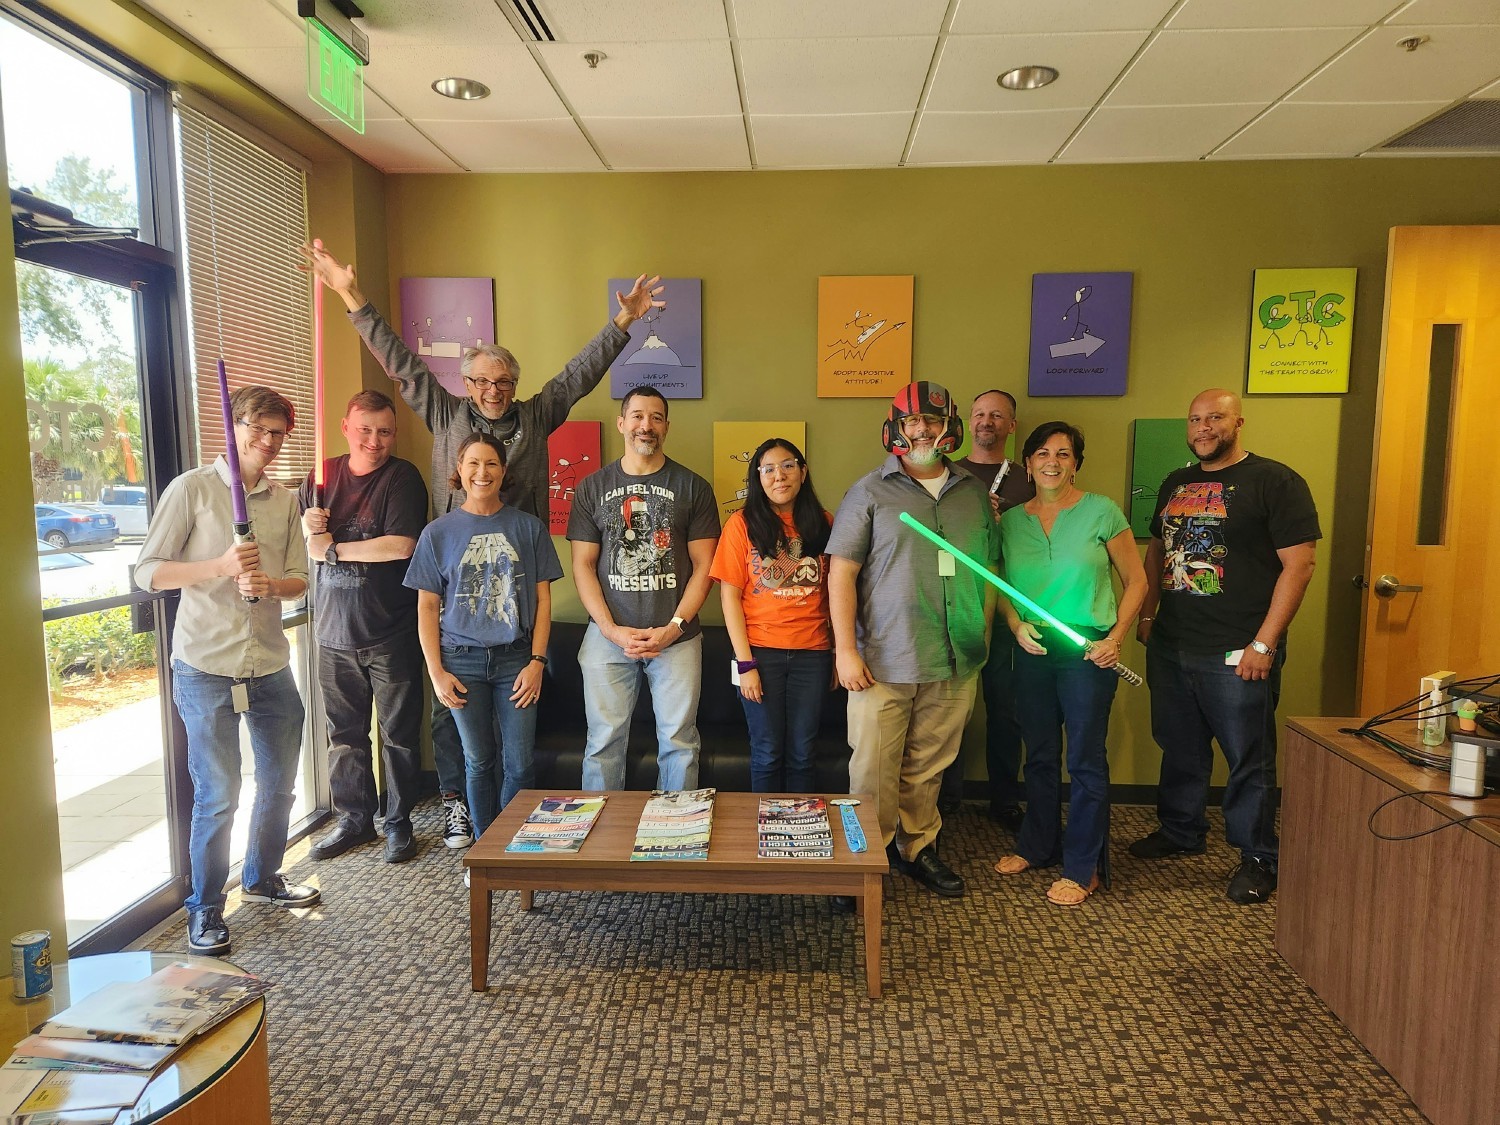 Our Melbourne team enjoys a fun Star Wars themed day on May 4